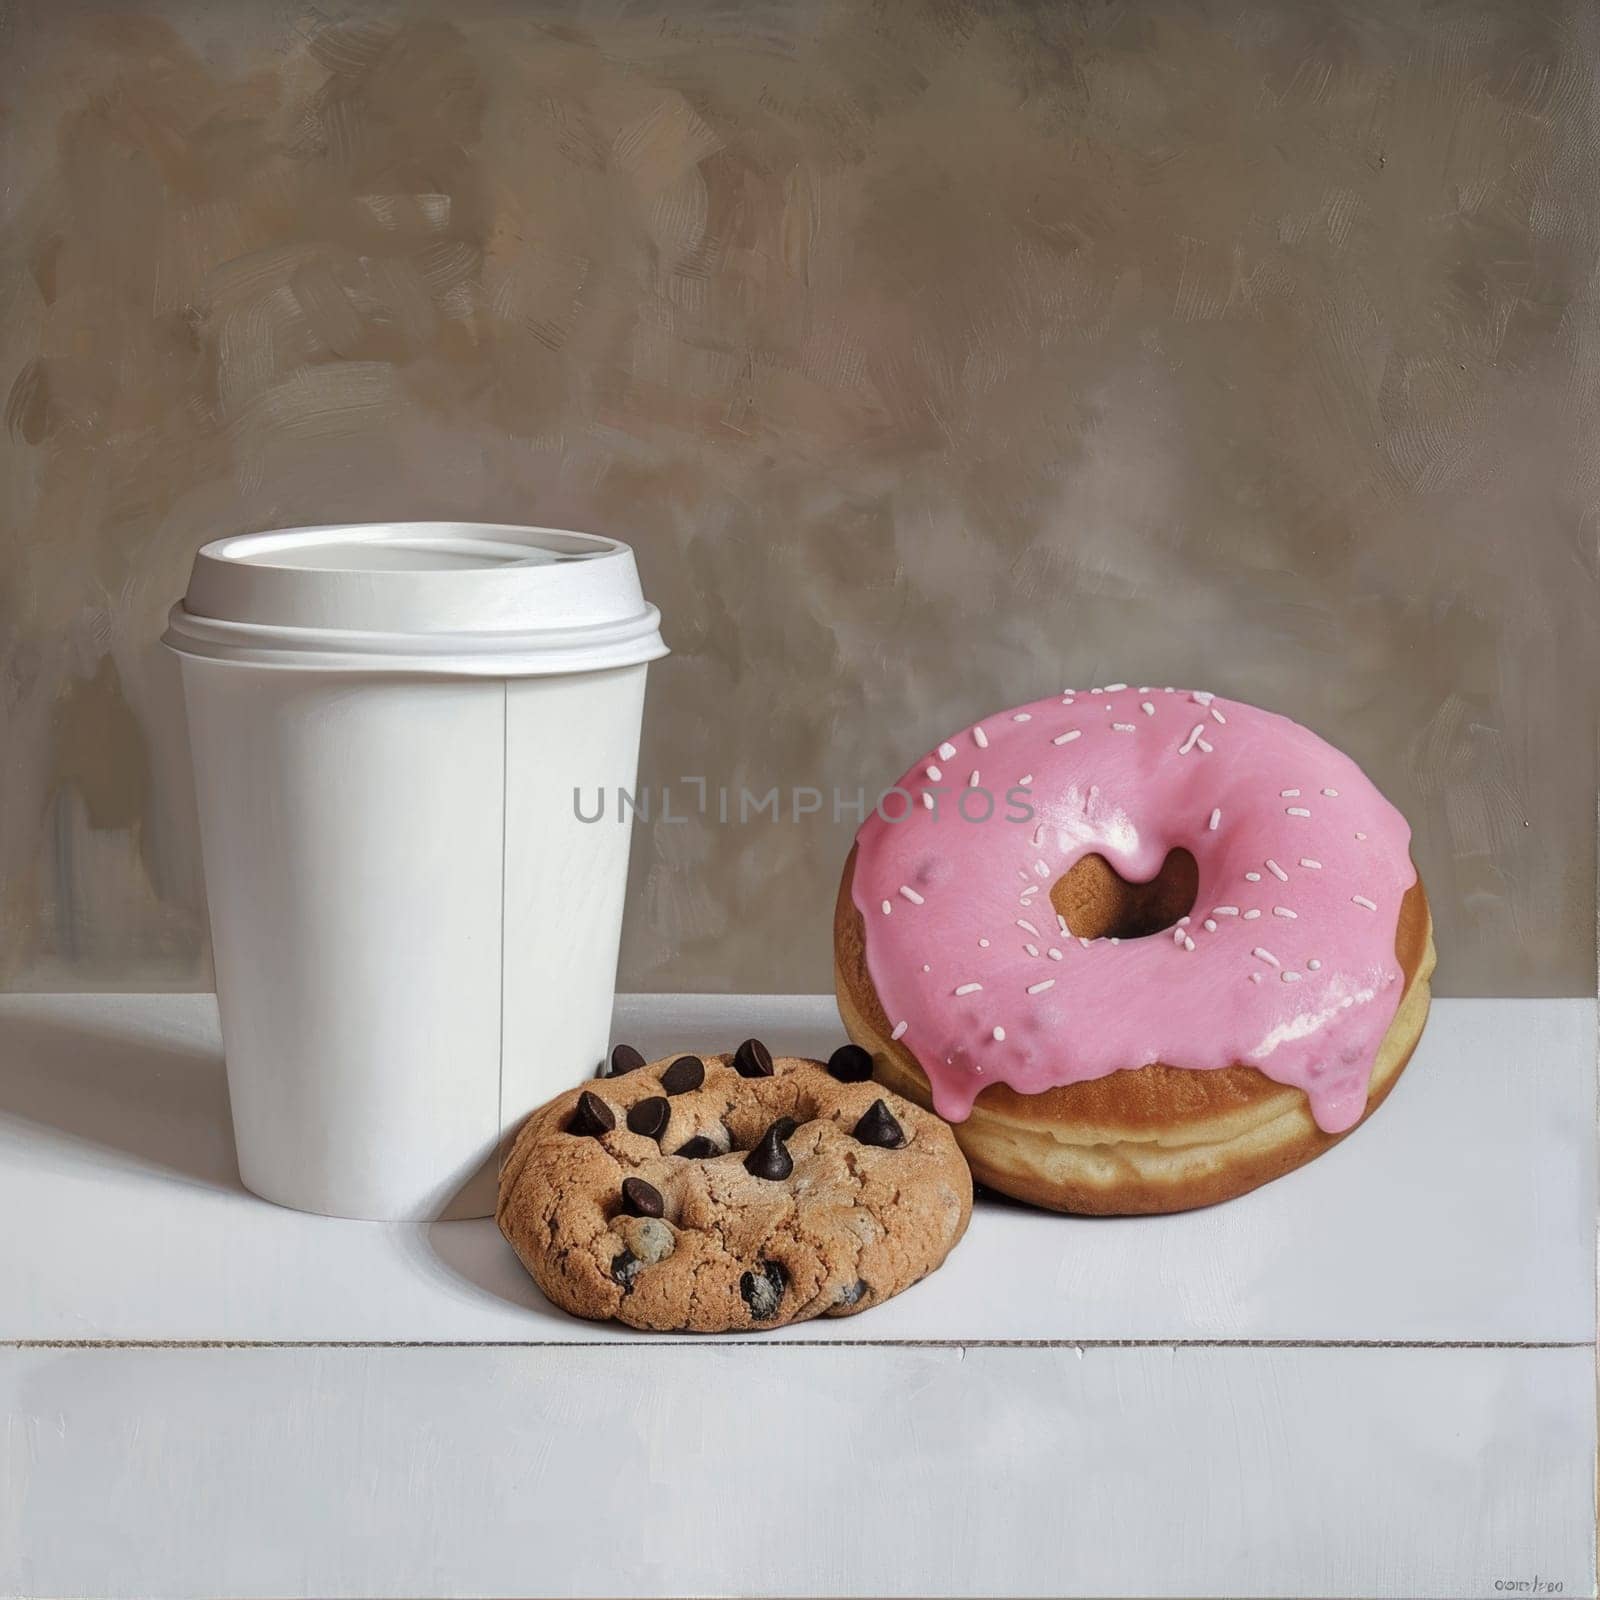 A cardboard coffee cup and two donuts are on the table.